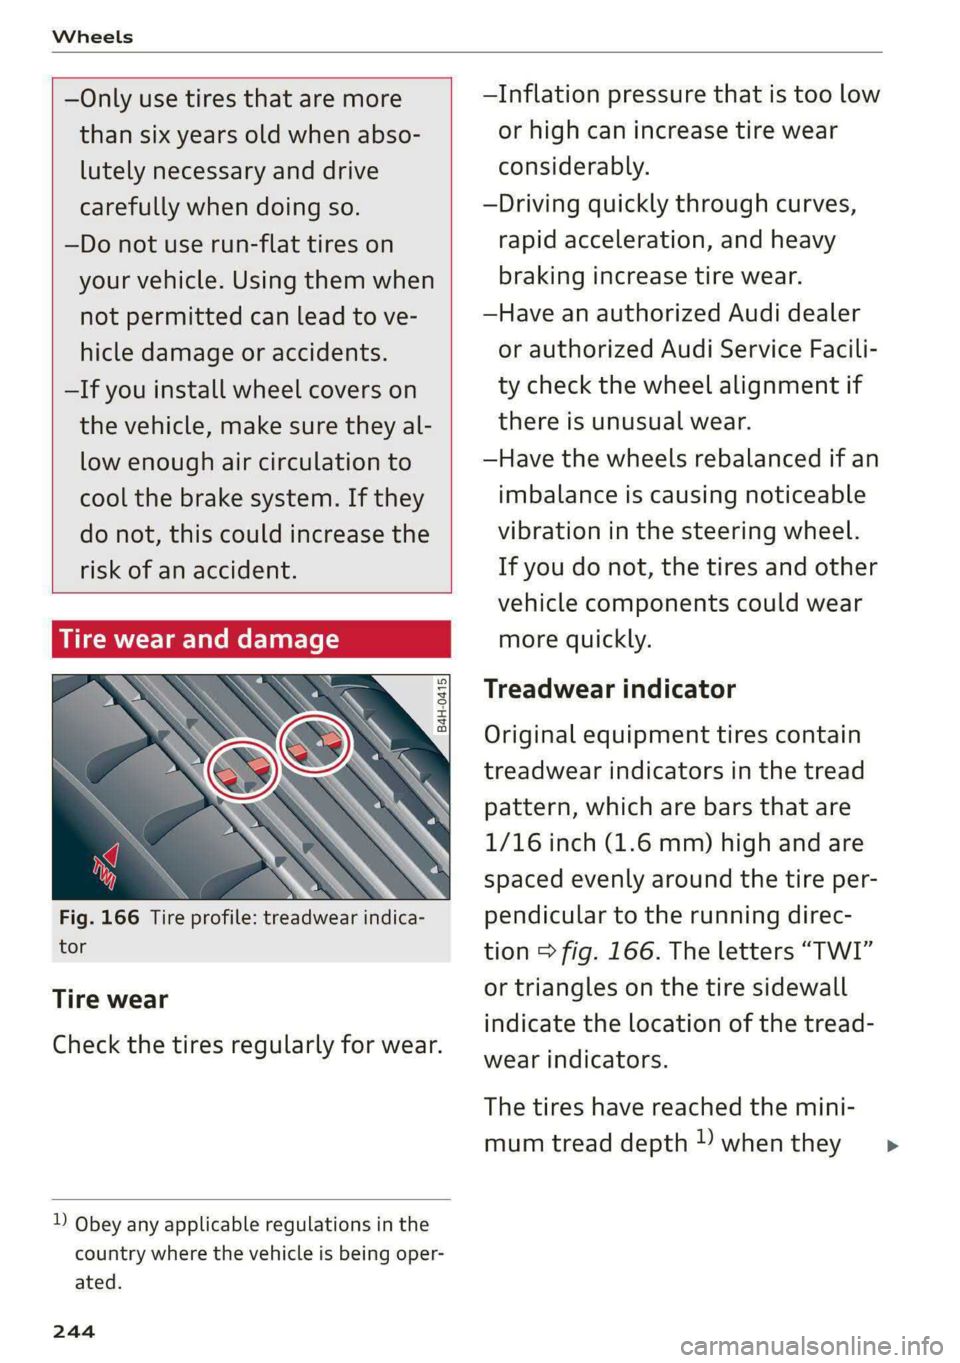 AUDI S4 2021  Owners Manual Wheels 
  
  
—Only use tires that are more 
than six years old when abso- 
lutely necessary and drive 
carefully when doing so. 
—Do not  use run-flat tires on 
your vehicle. Using them when 
not